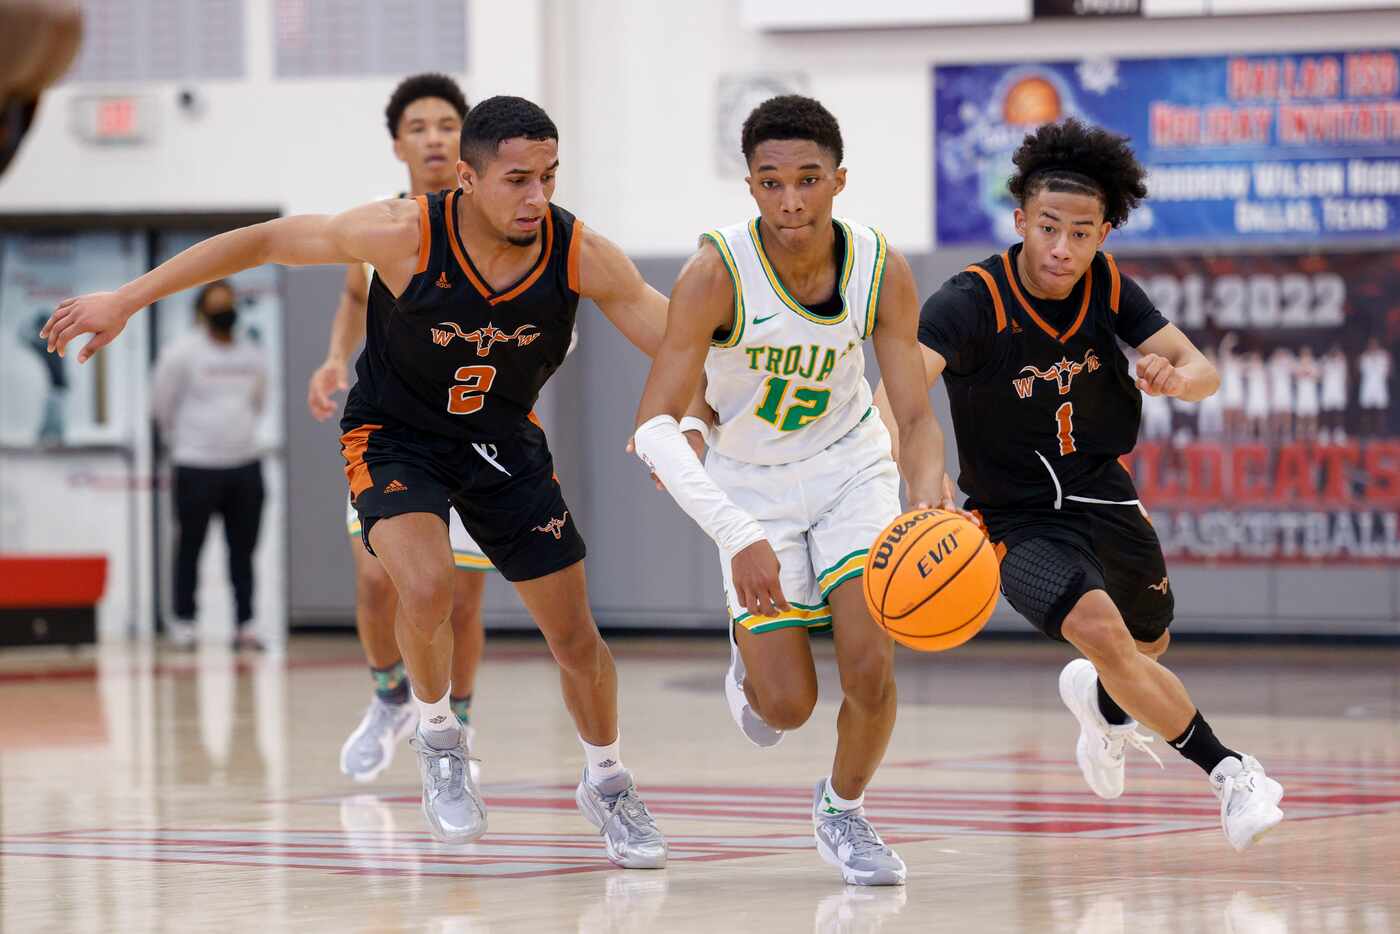 Madison guard Brandon Patterson (12) dribbles between W.T. White guards Raul Nieves (2) and...